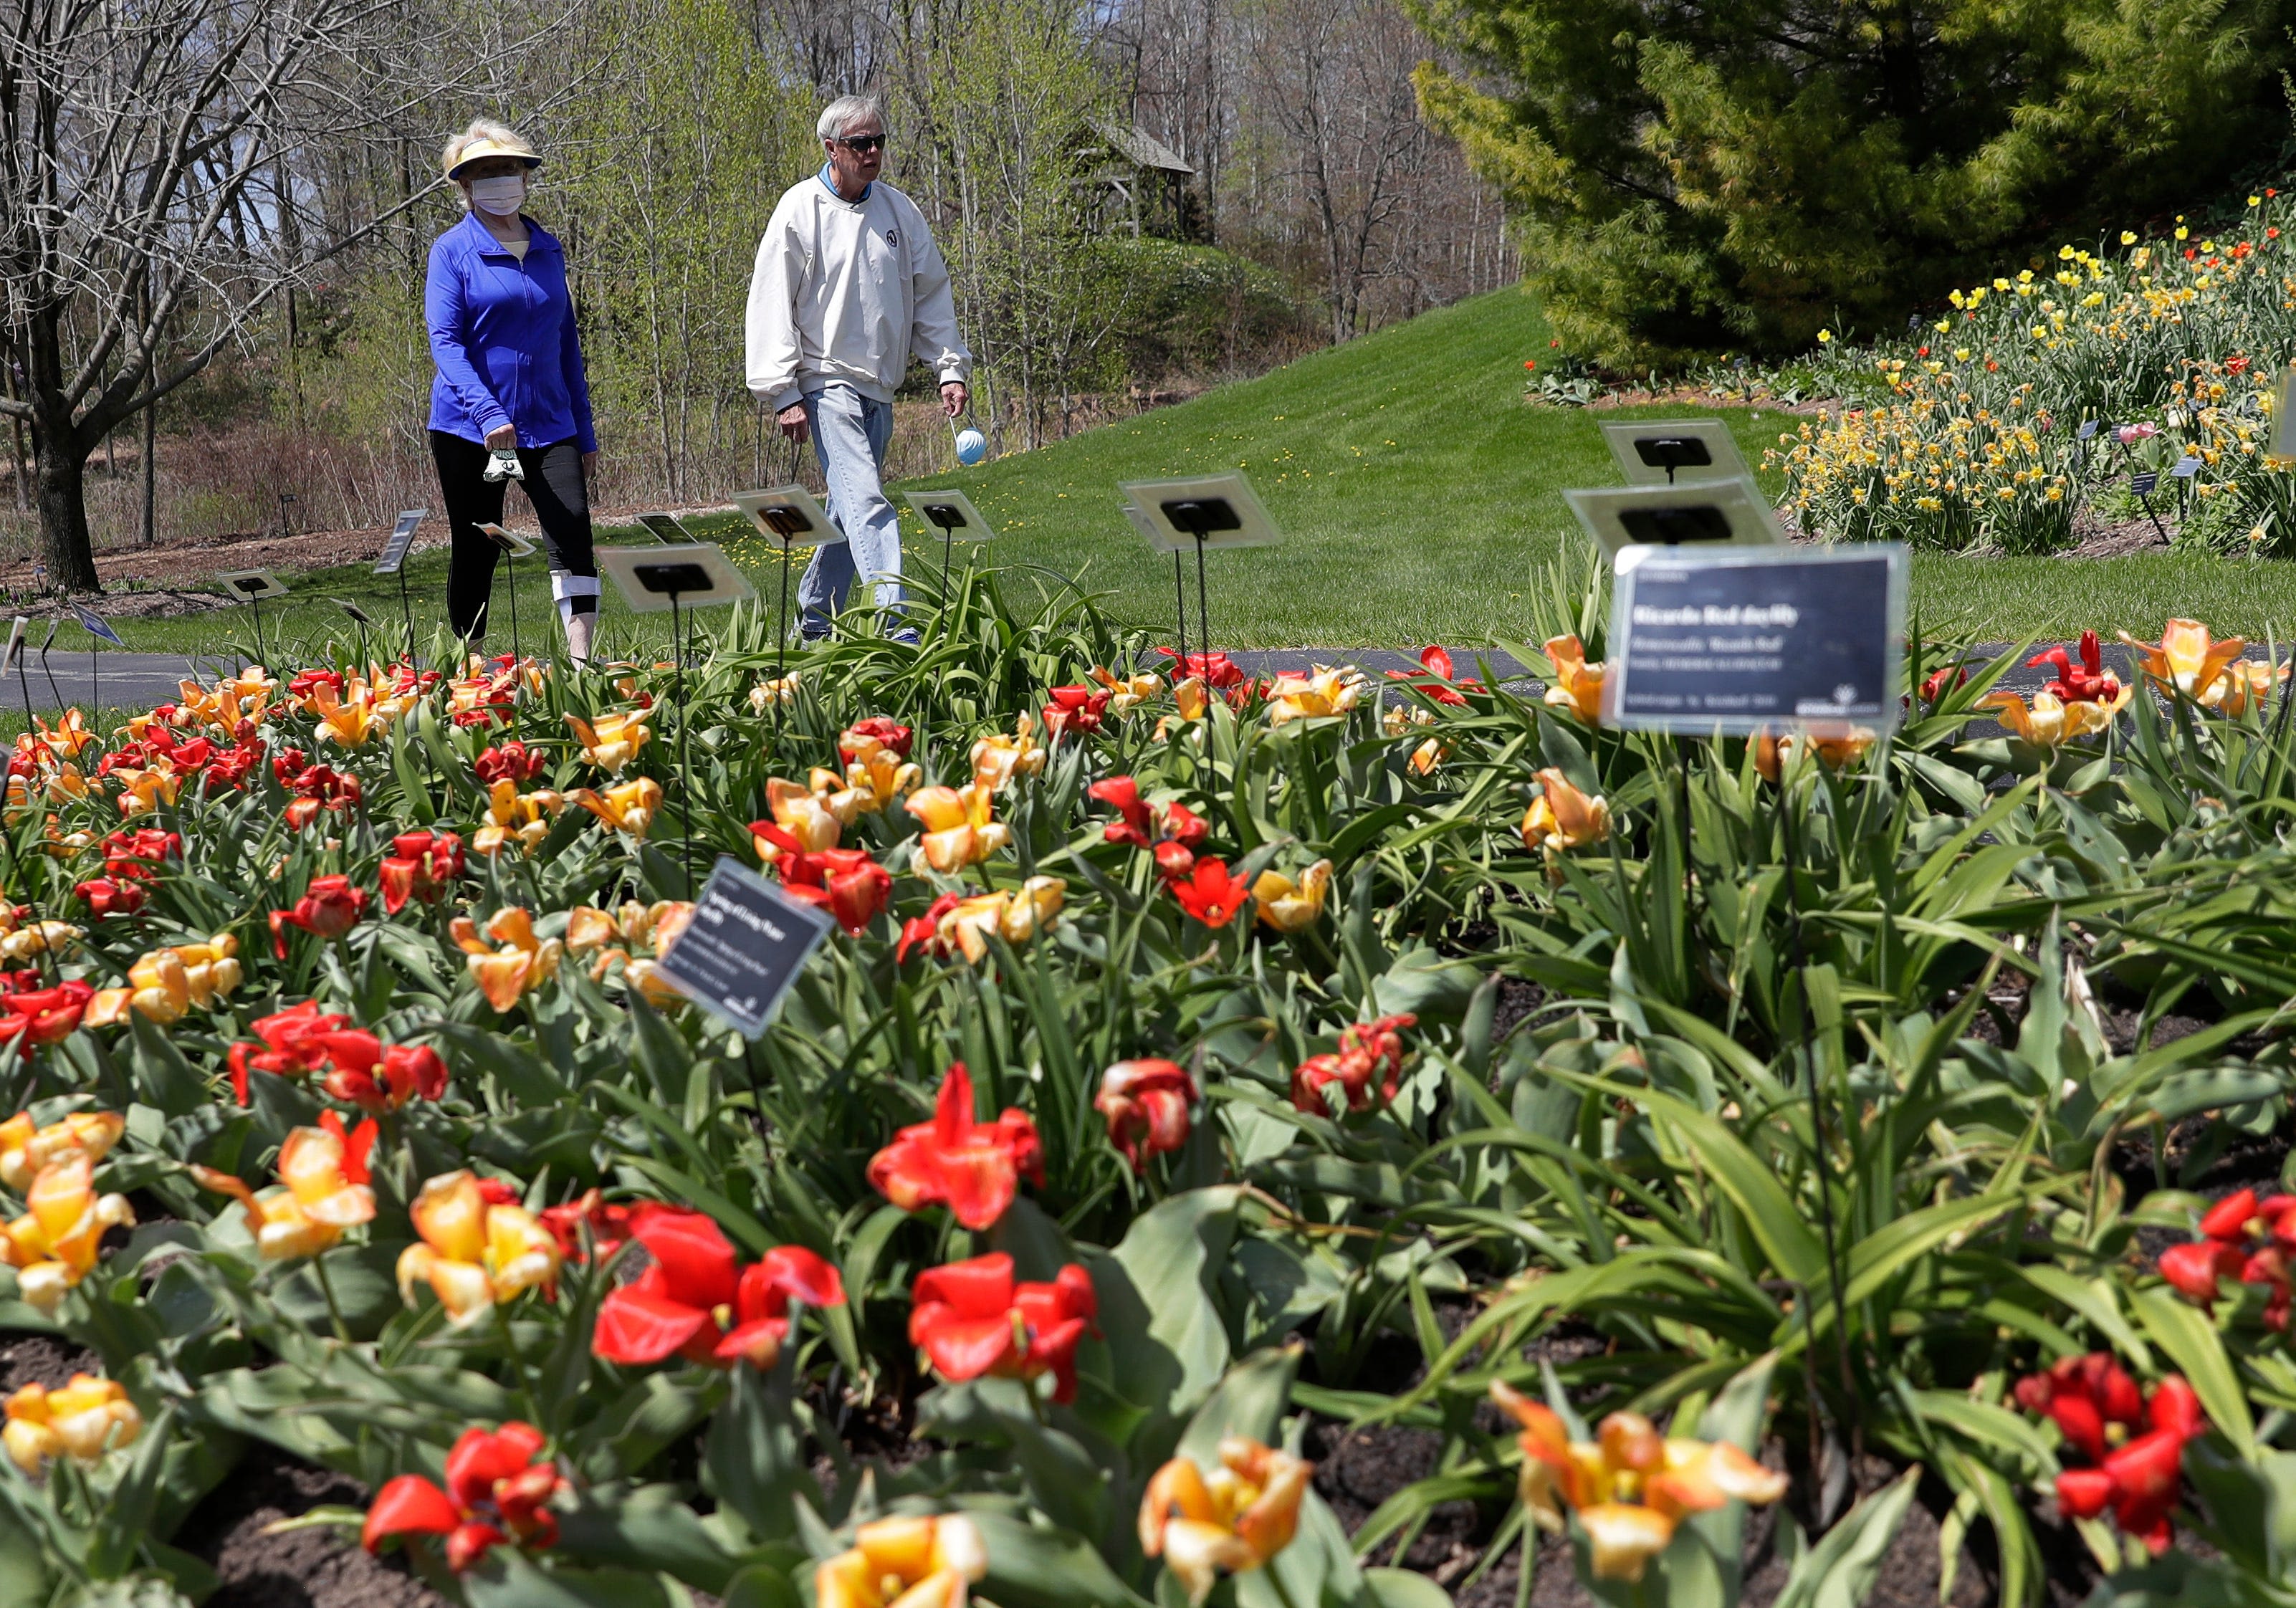 Where to take Mom to see spring flowers Mother's Day weekend